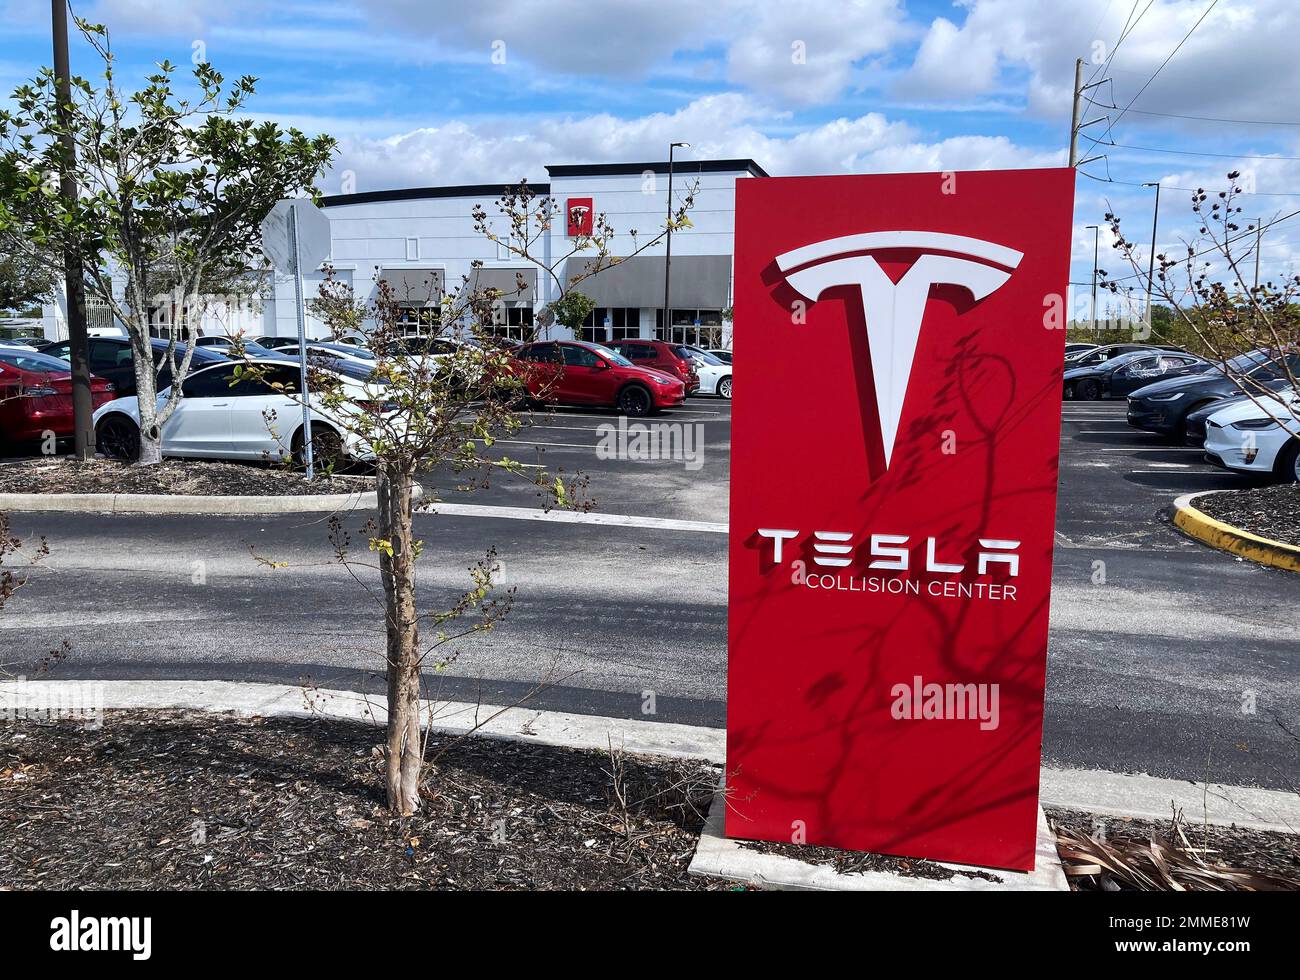 Orlando, United States. 29th Jan, 2023. A Tesla collision center is seen in Orlando. Shares of Tesla stock increased 33% this week, marking their best weekly performance since May 2013, and following a drop of 40% over the previous six months. Tesla is on target to potentially produce 2 million vehicles in 2023, according to CEO Elon Musk. Credit: SOPA Images Limited/Alamy Live News Stock Photo